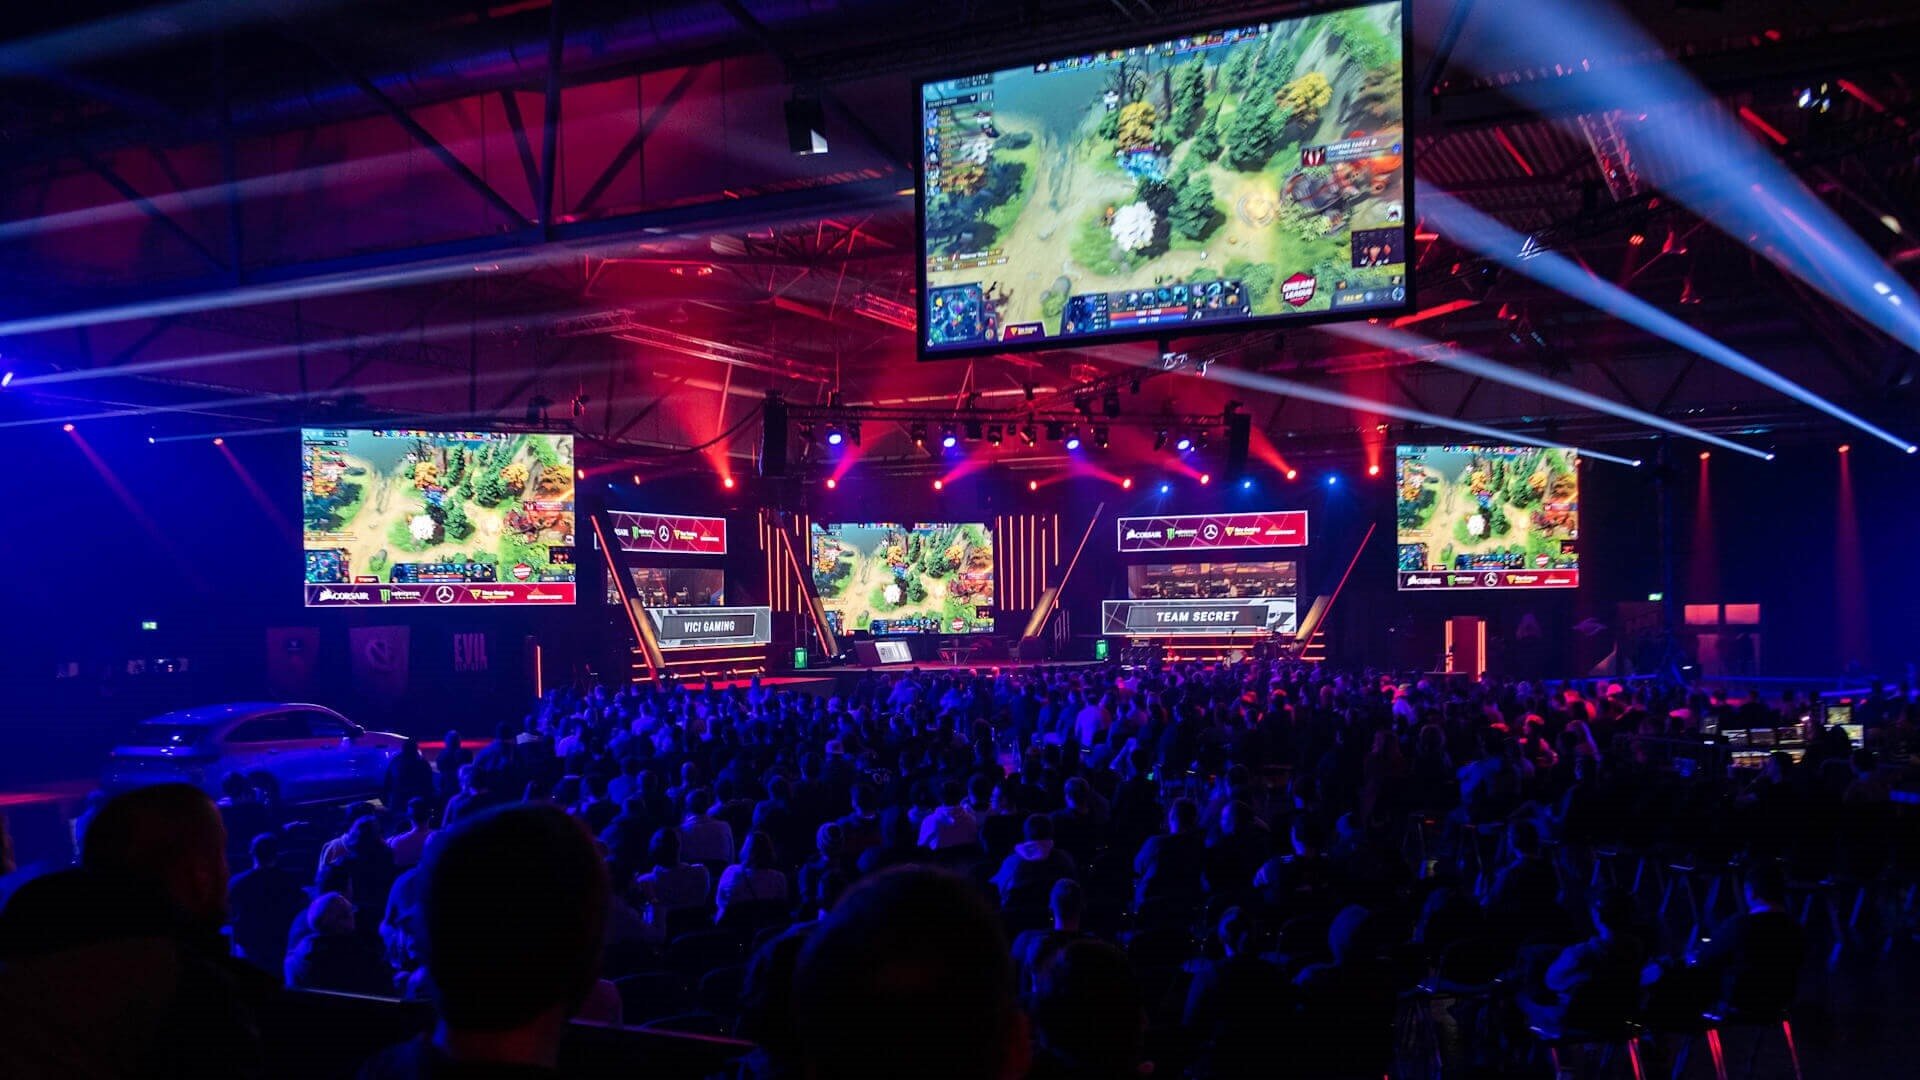 A crowd gathered to watch an esports event